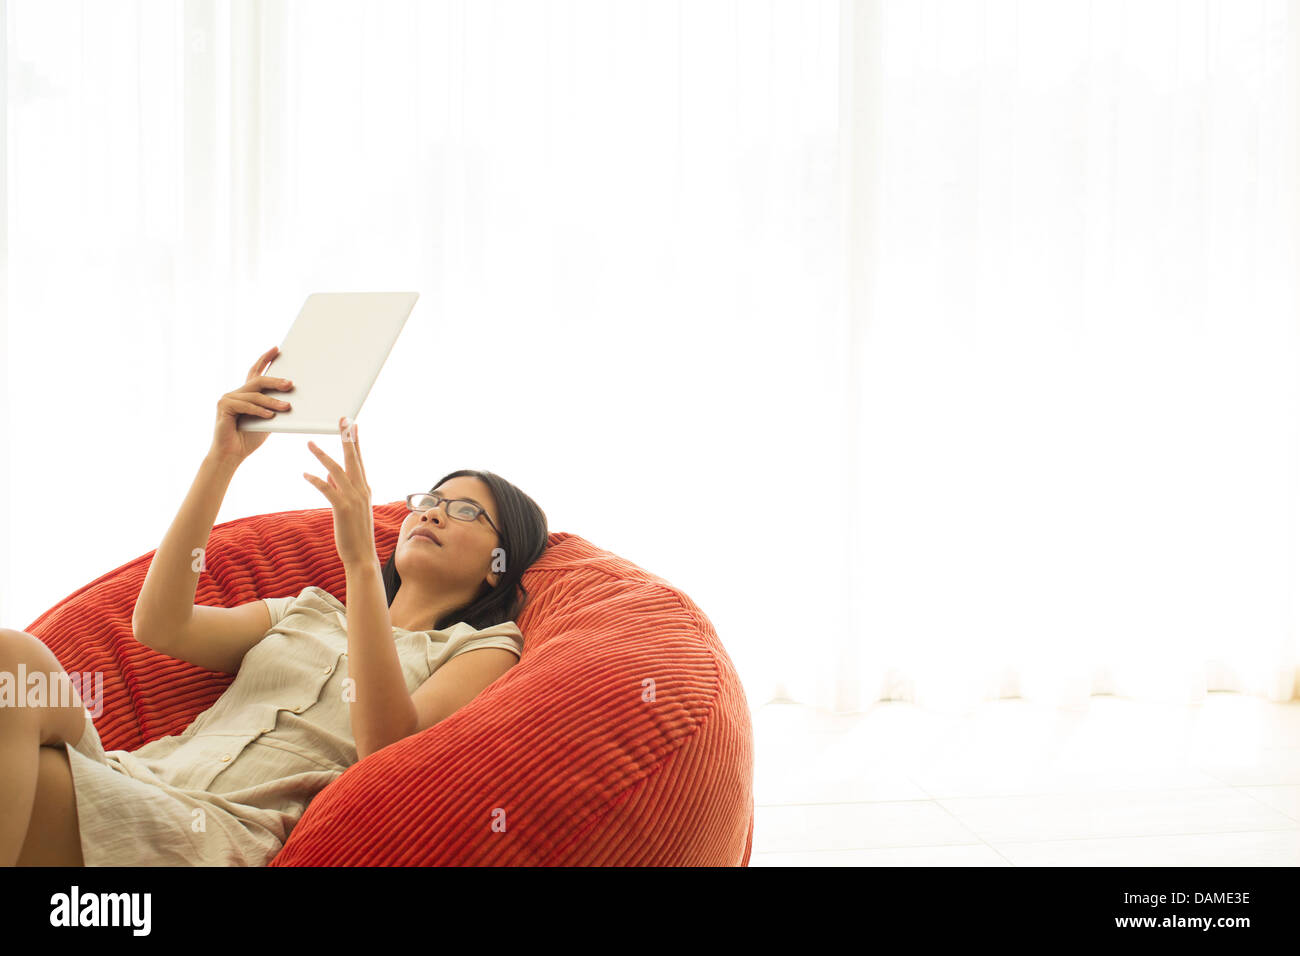 Woman using tablet computer in beanbag chair Stock Photo